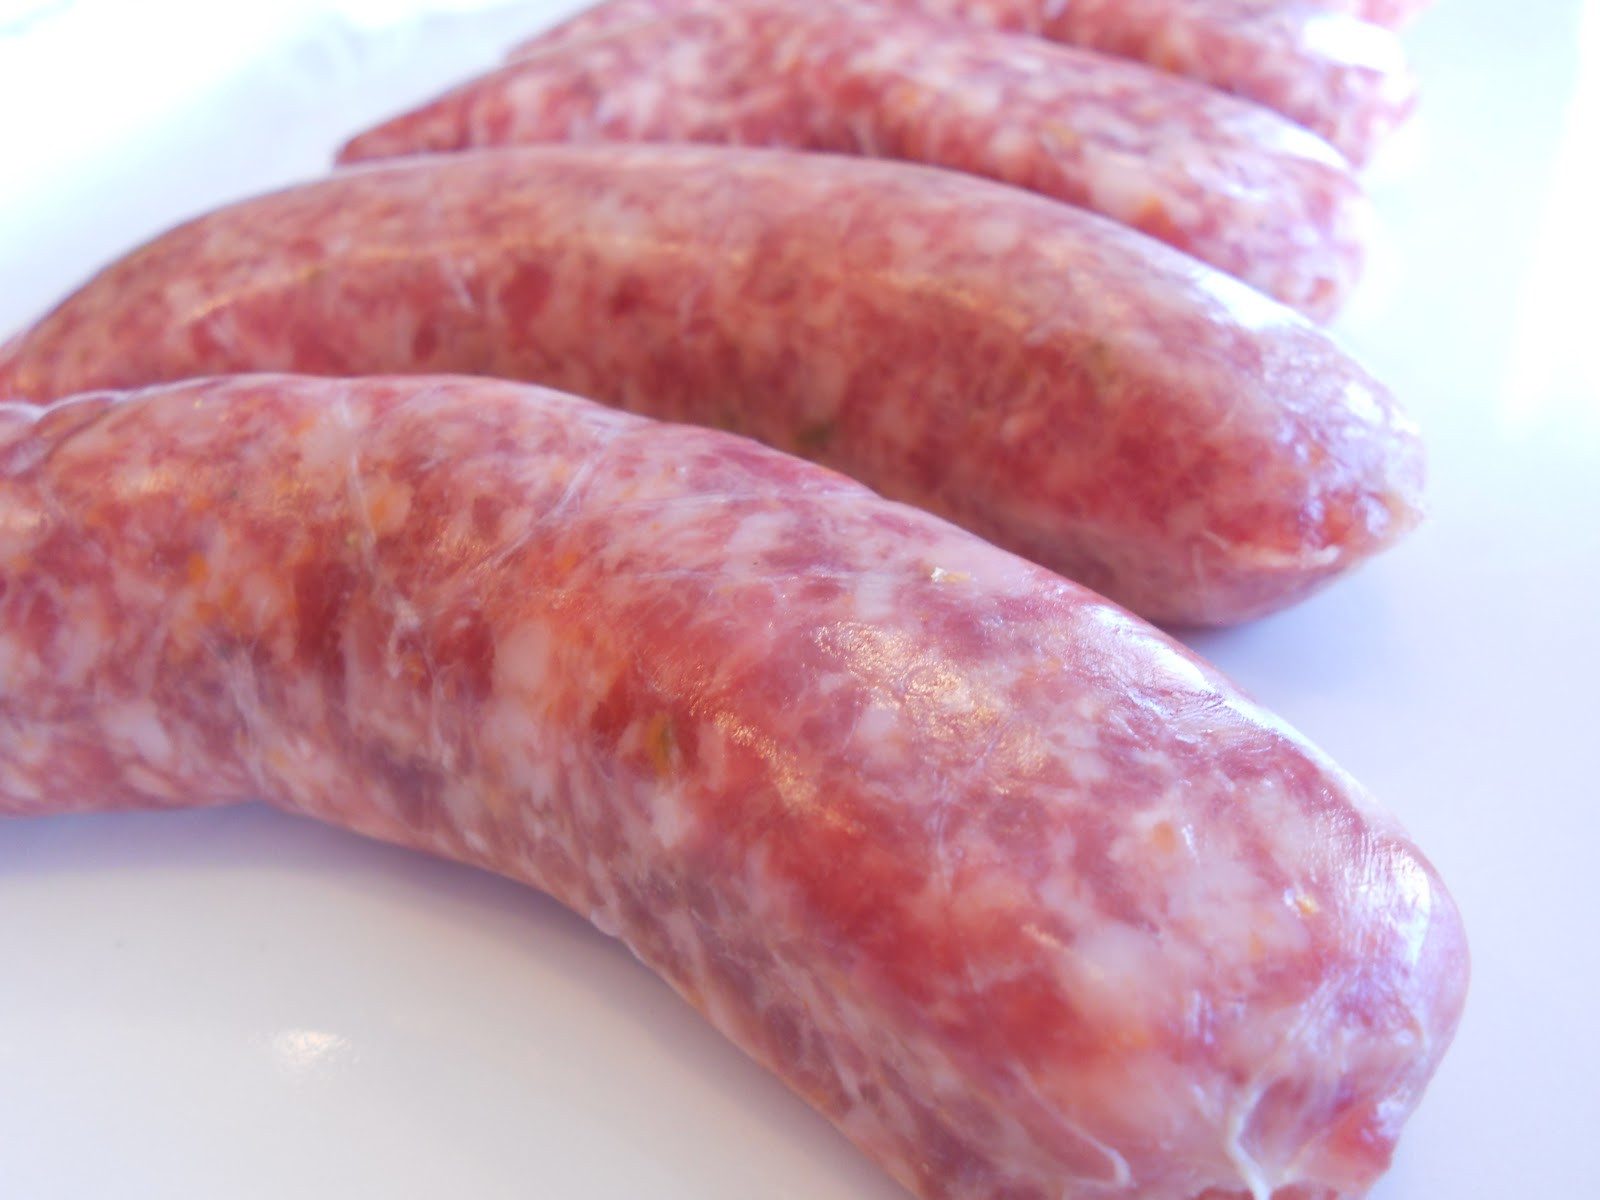 Recipes for Sweet Italian Sausage Lovely Sweet Italian Sausage Recipe